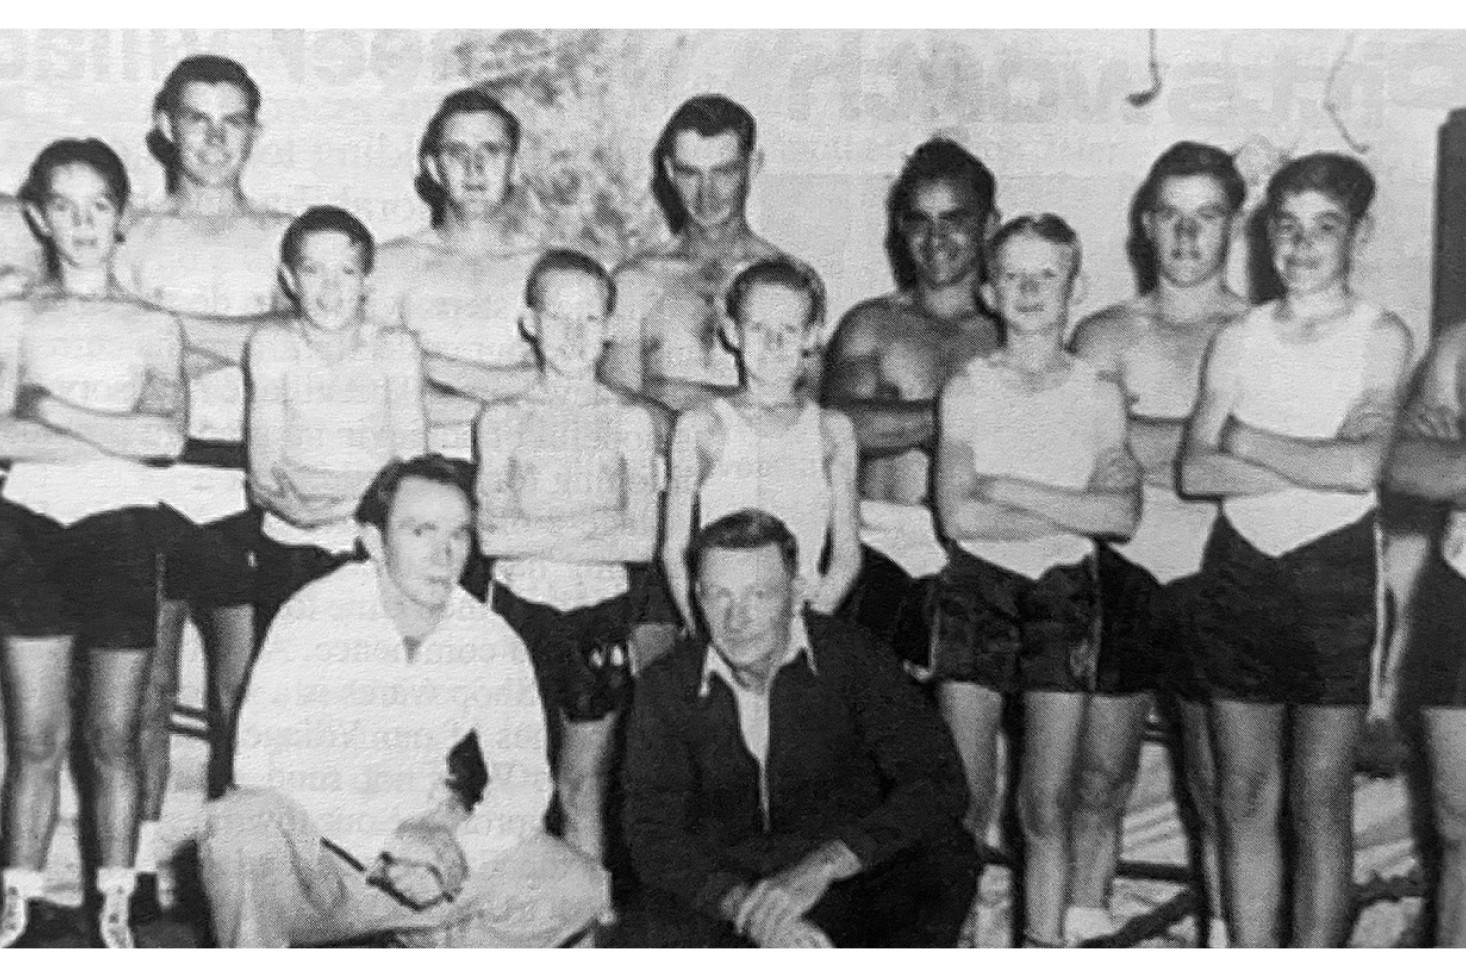 The 1956 Pittsworth boxing team comprised (from back) George Patterson, Brian Kelly, John Thomas, Allan Cronin, Bill Crowley, Norm Smith, Ace Fraser, (middle) Neville Hohn, Billy Walsh, Wilton Bowden, John Bowden, Dudley Cronin, Des Hohn, (kneeling) with trainer Digger Martin and Manager Reg Bowden.